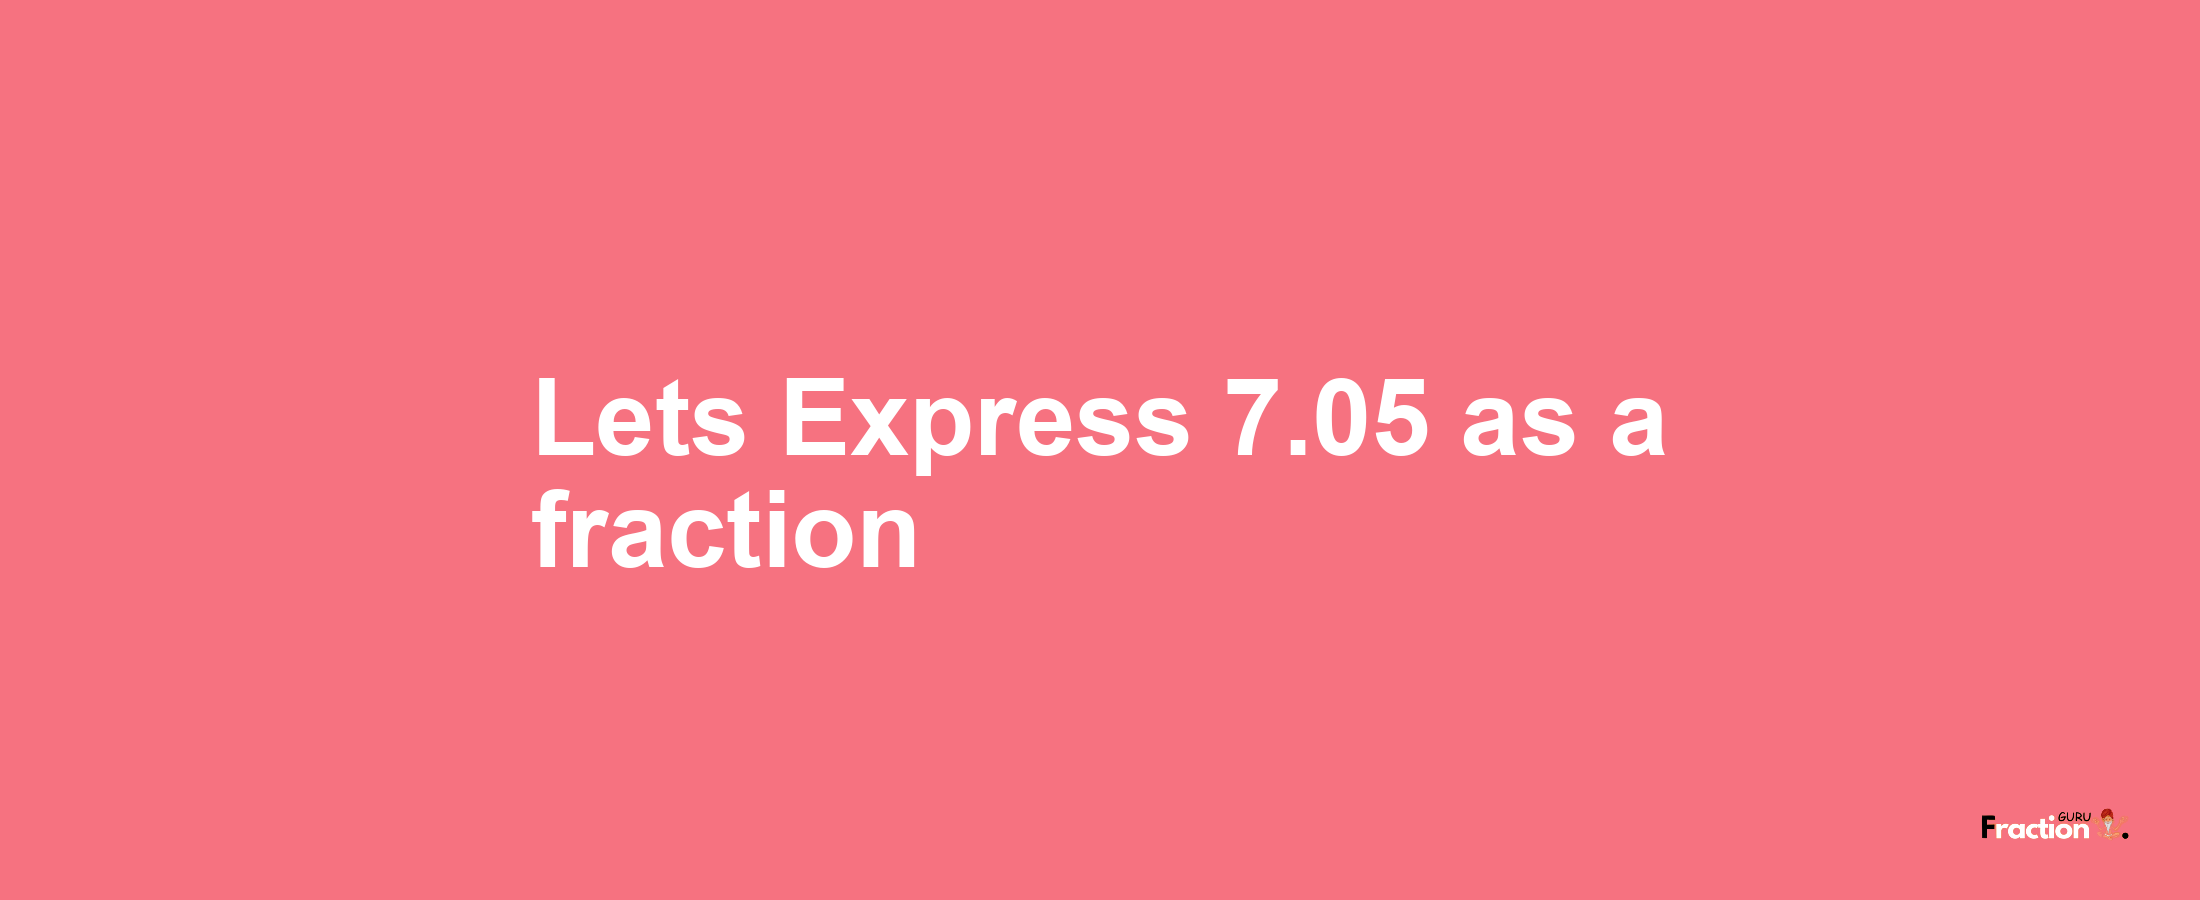 Lets Express 7.05 as afraction